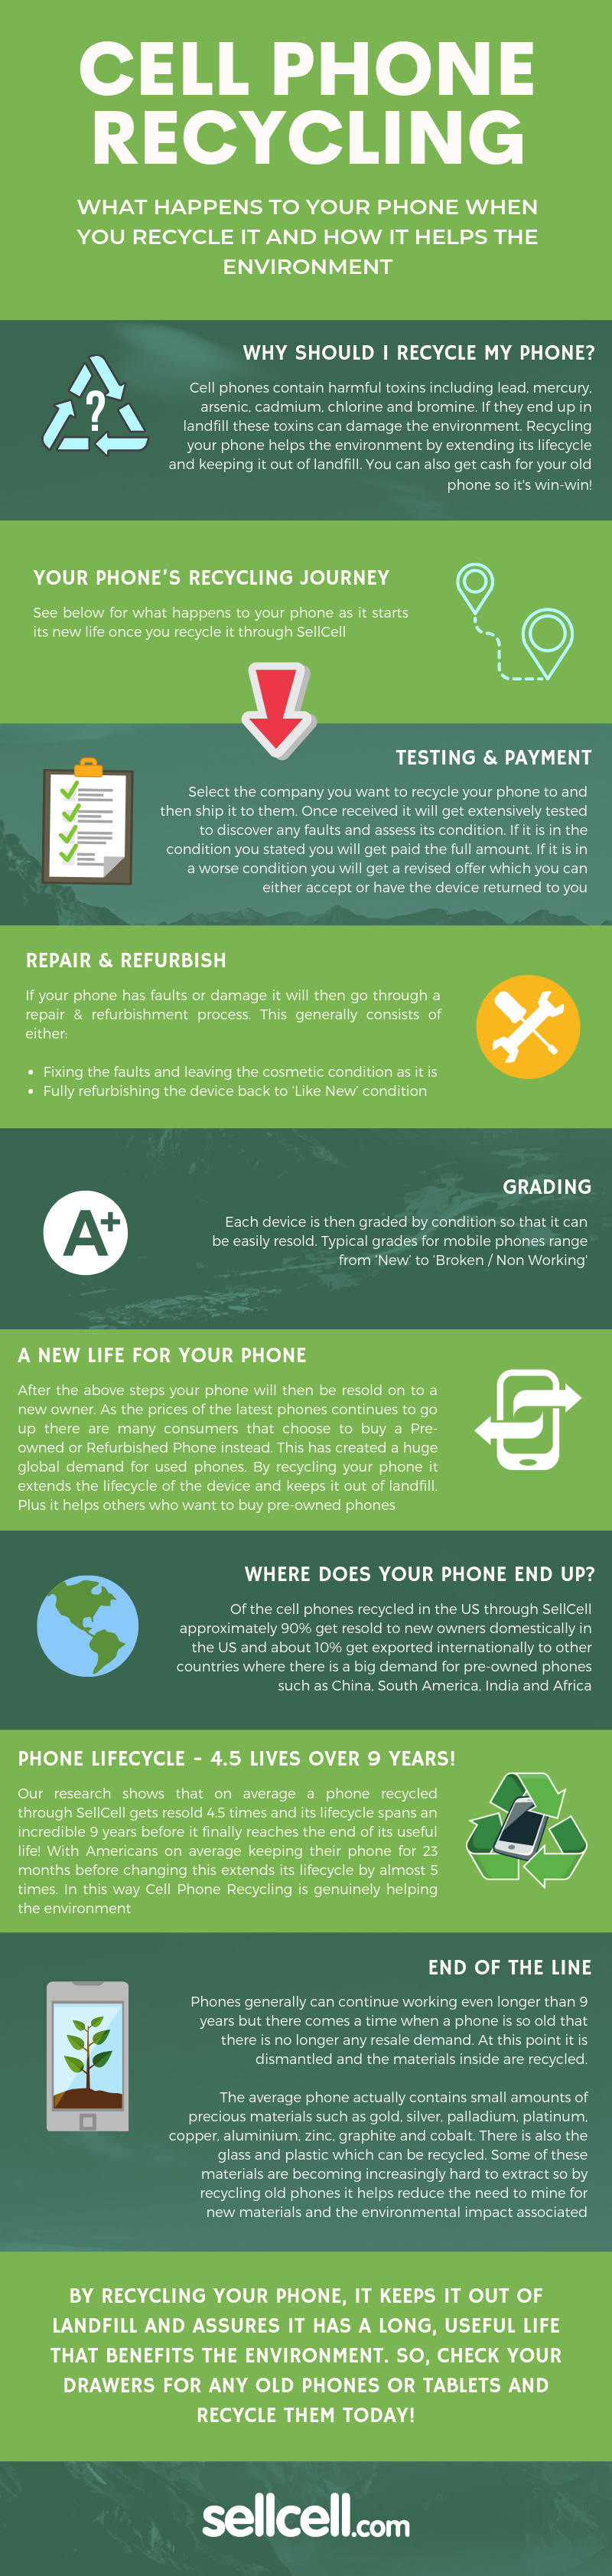 Cell Phone Recycling Infographic - What Happens to Your Phone When You Recycle it